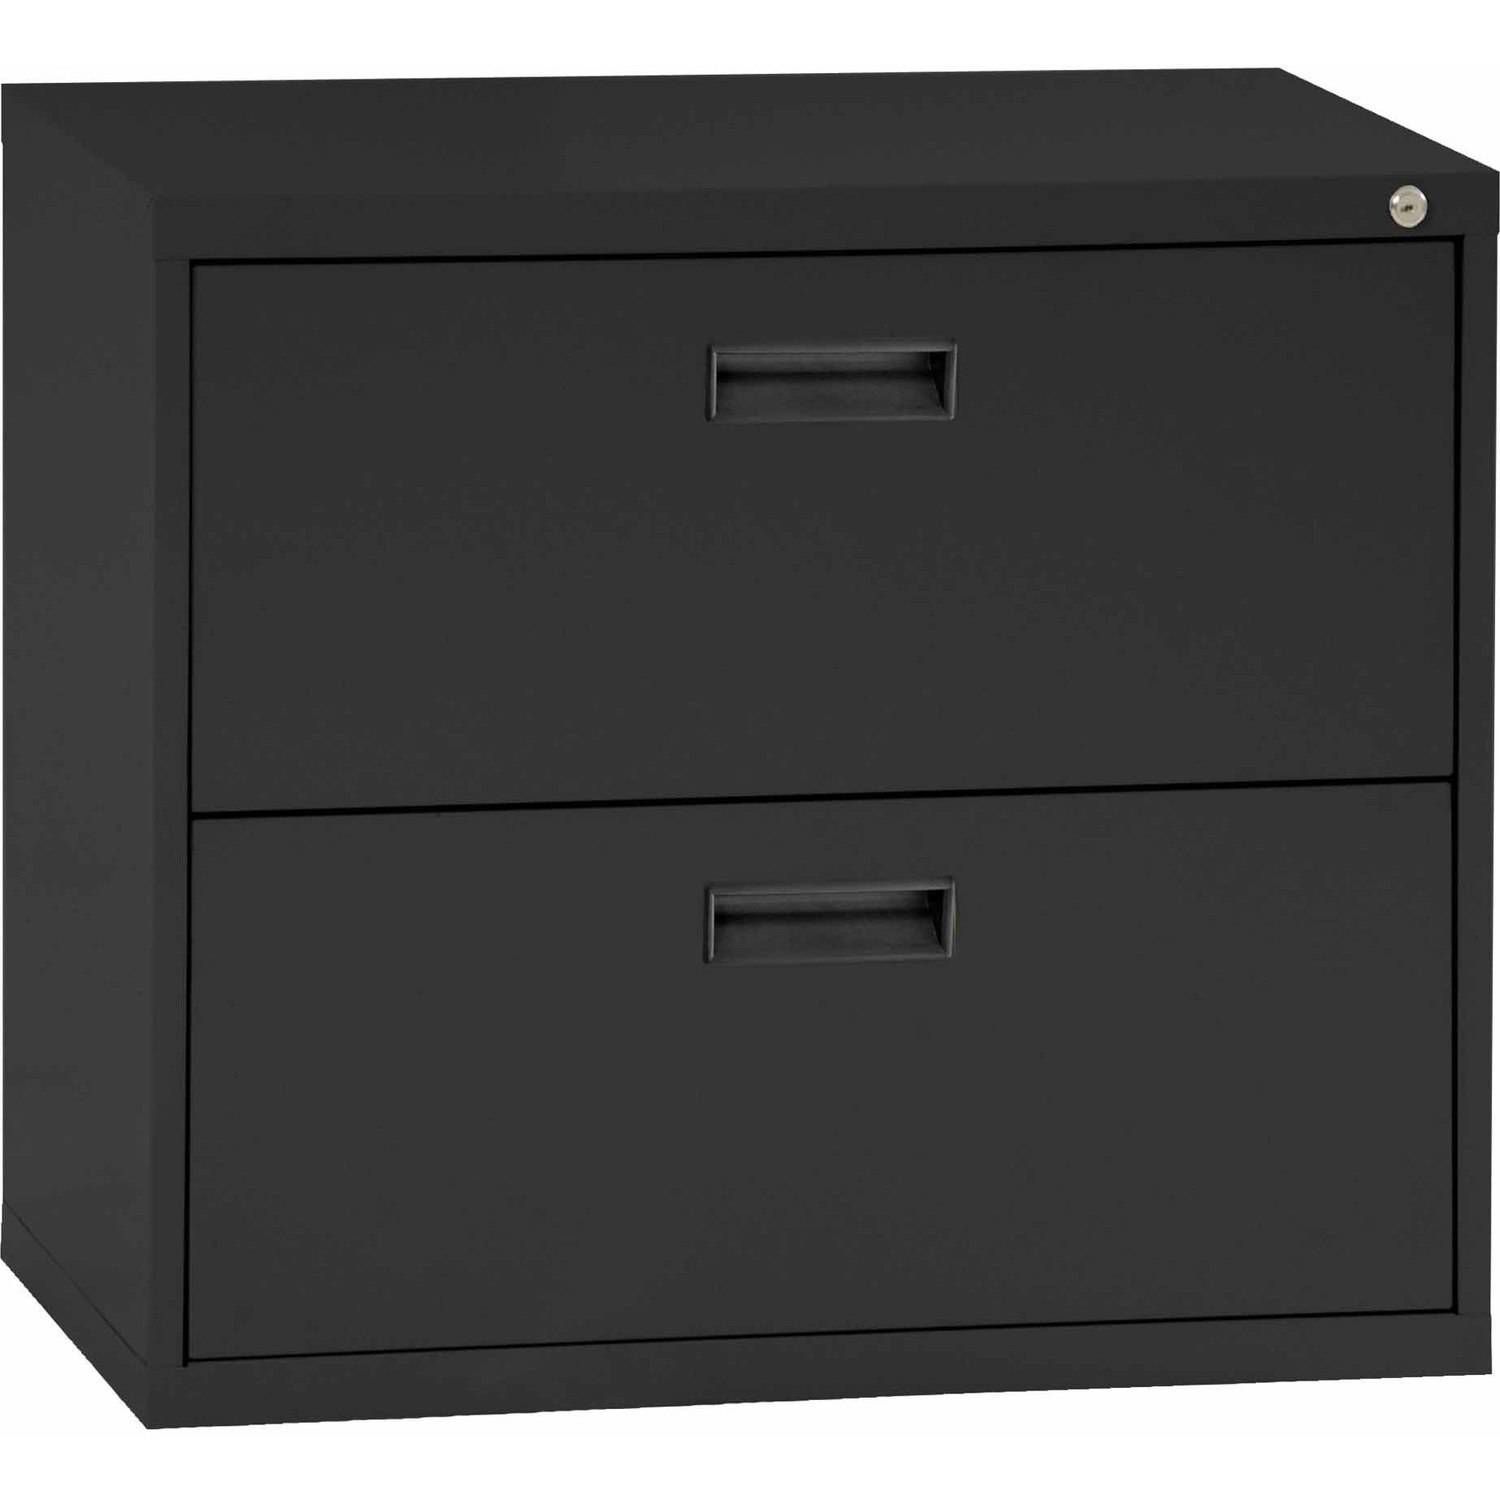 Sandusky Steel Lateral File Cabinet With Plastic Handle 2 Drawers E202l 09 intended for size 1500 X 1500